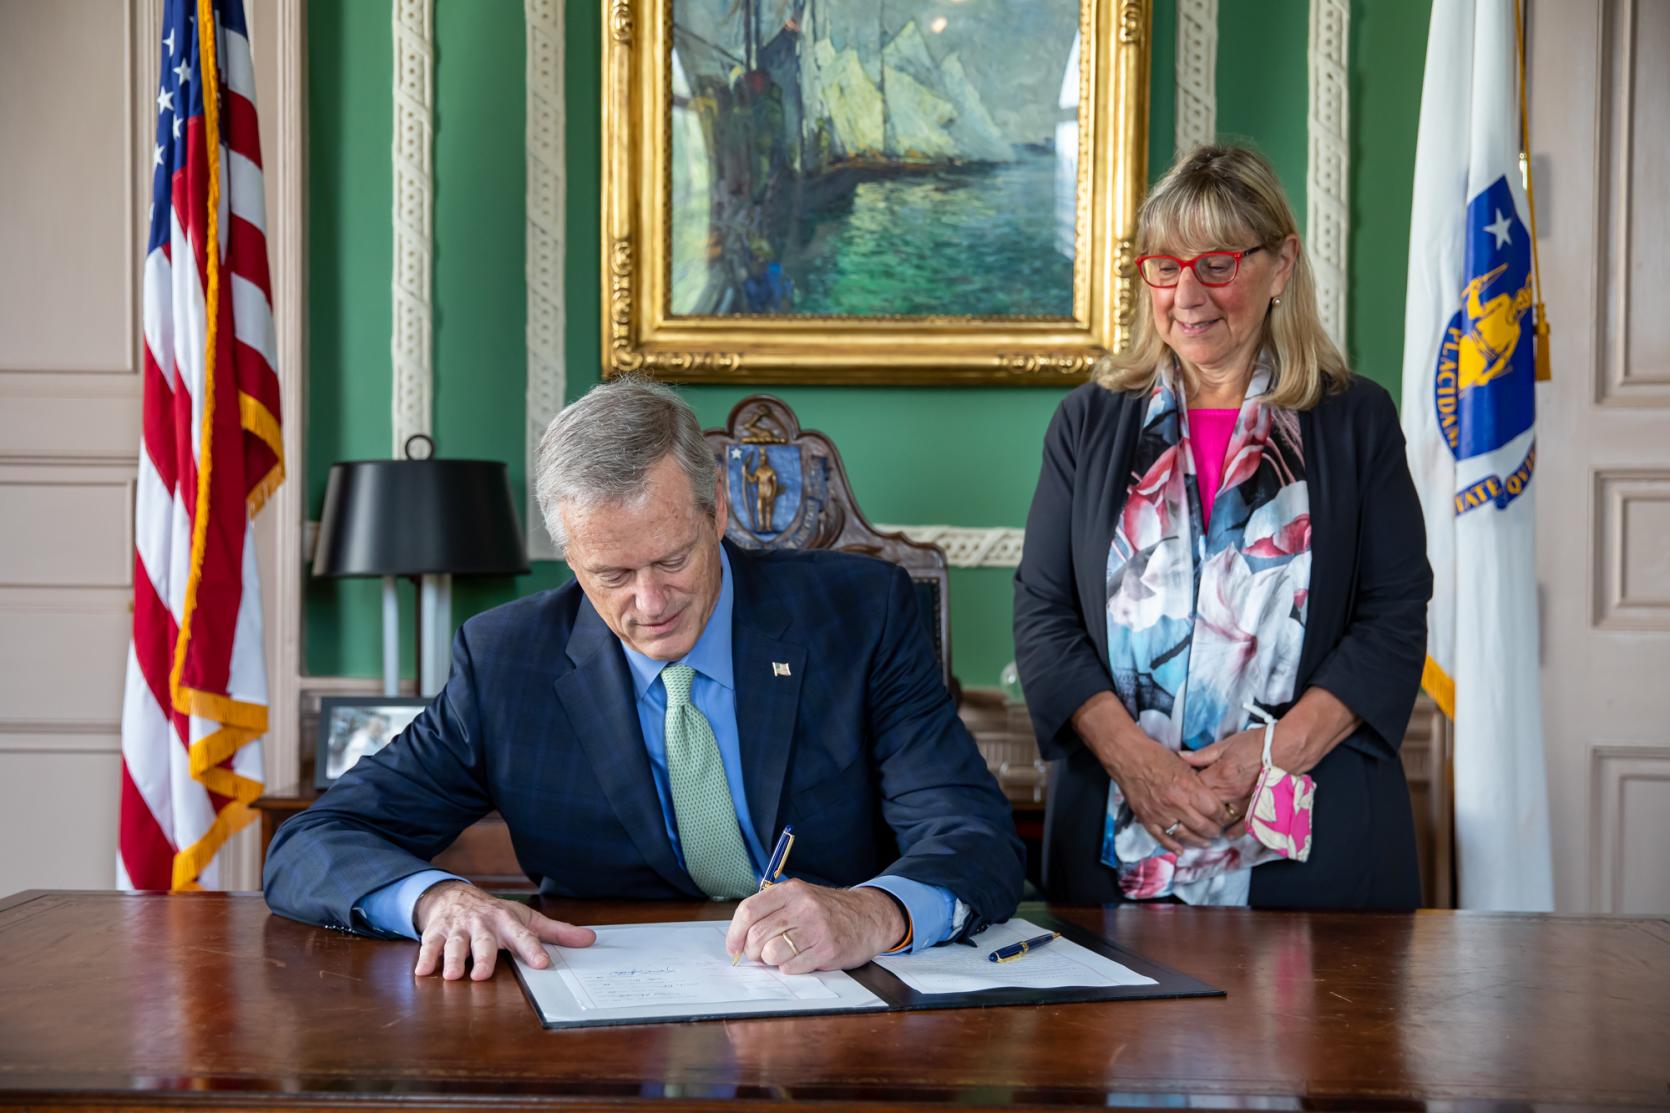 Governor Baker Signs Legislation Further Protecting Access to Reproductive Health Care Services